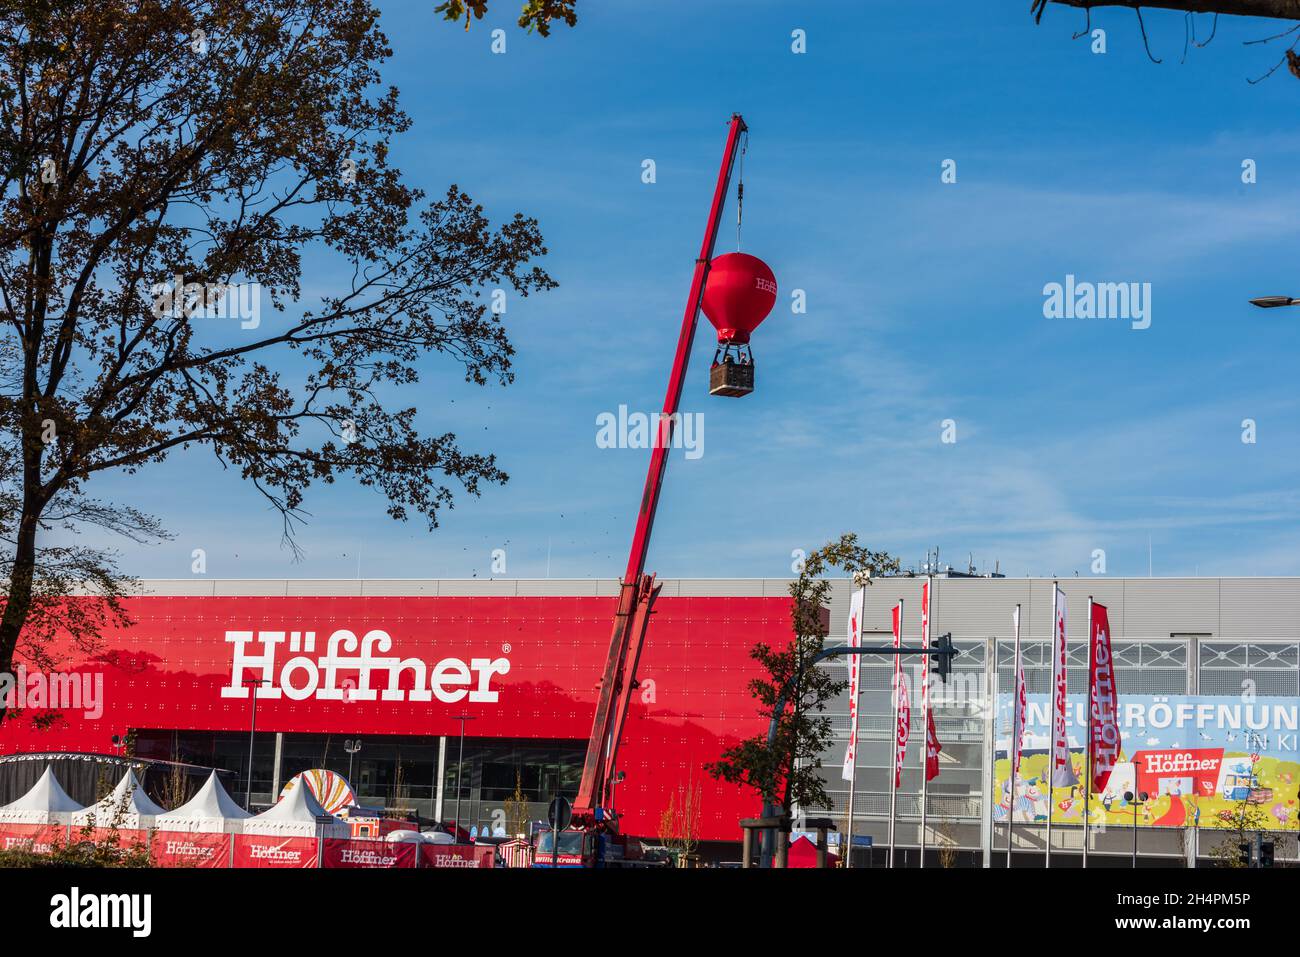 Hoffner High Resolution Stock Photography and Images - Alamy